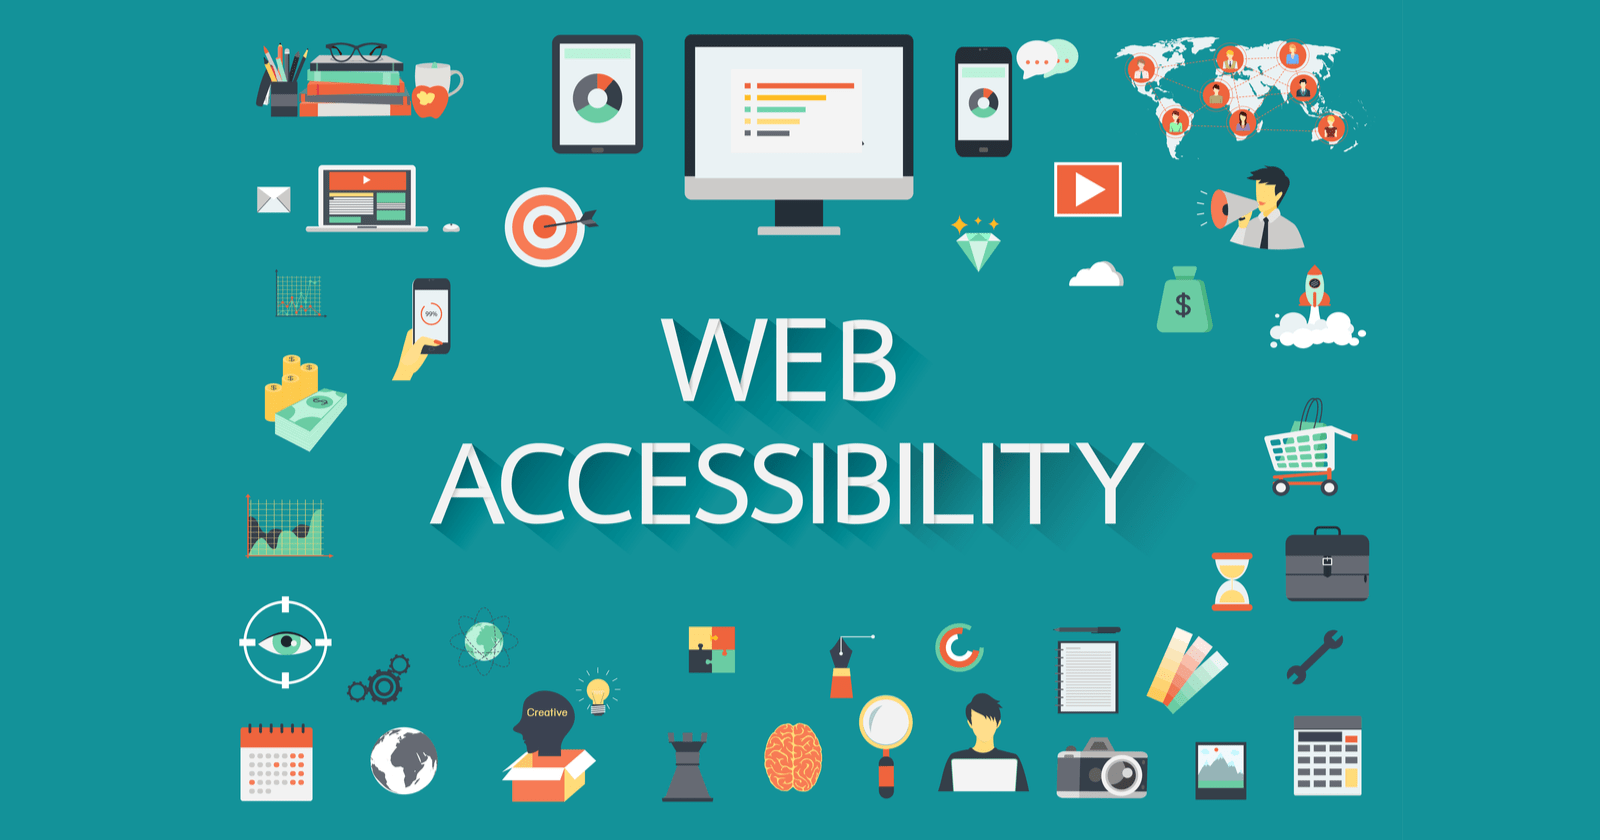 5 Tips for Designing an Accessible Website